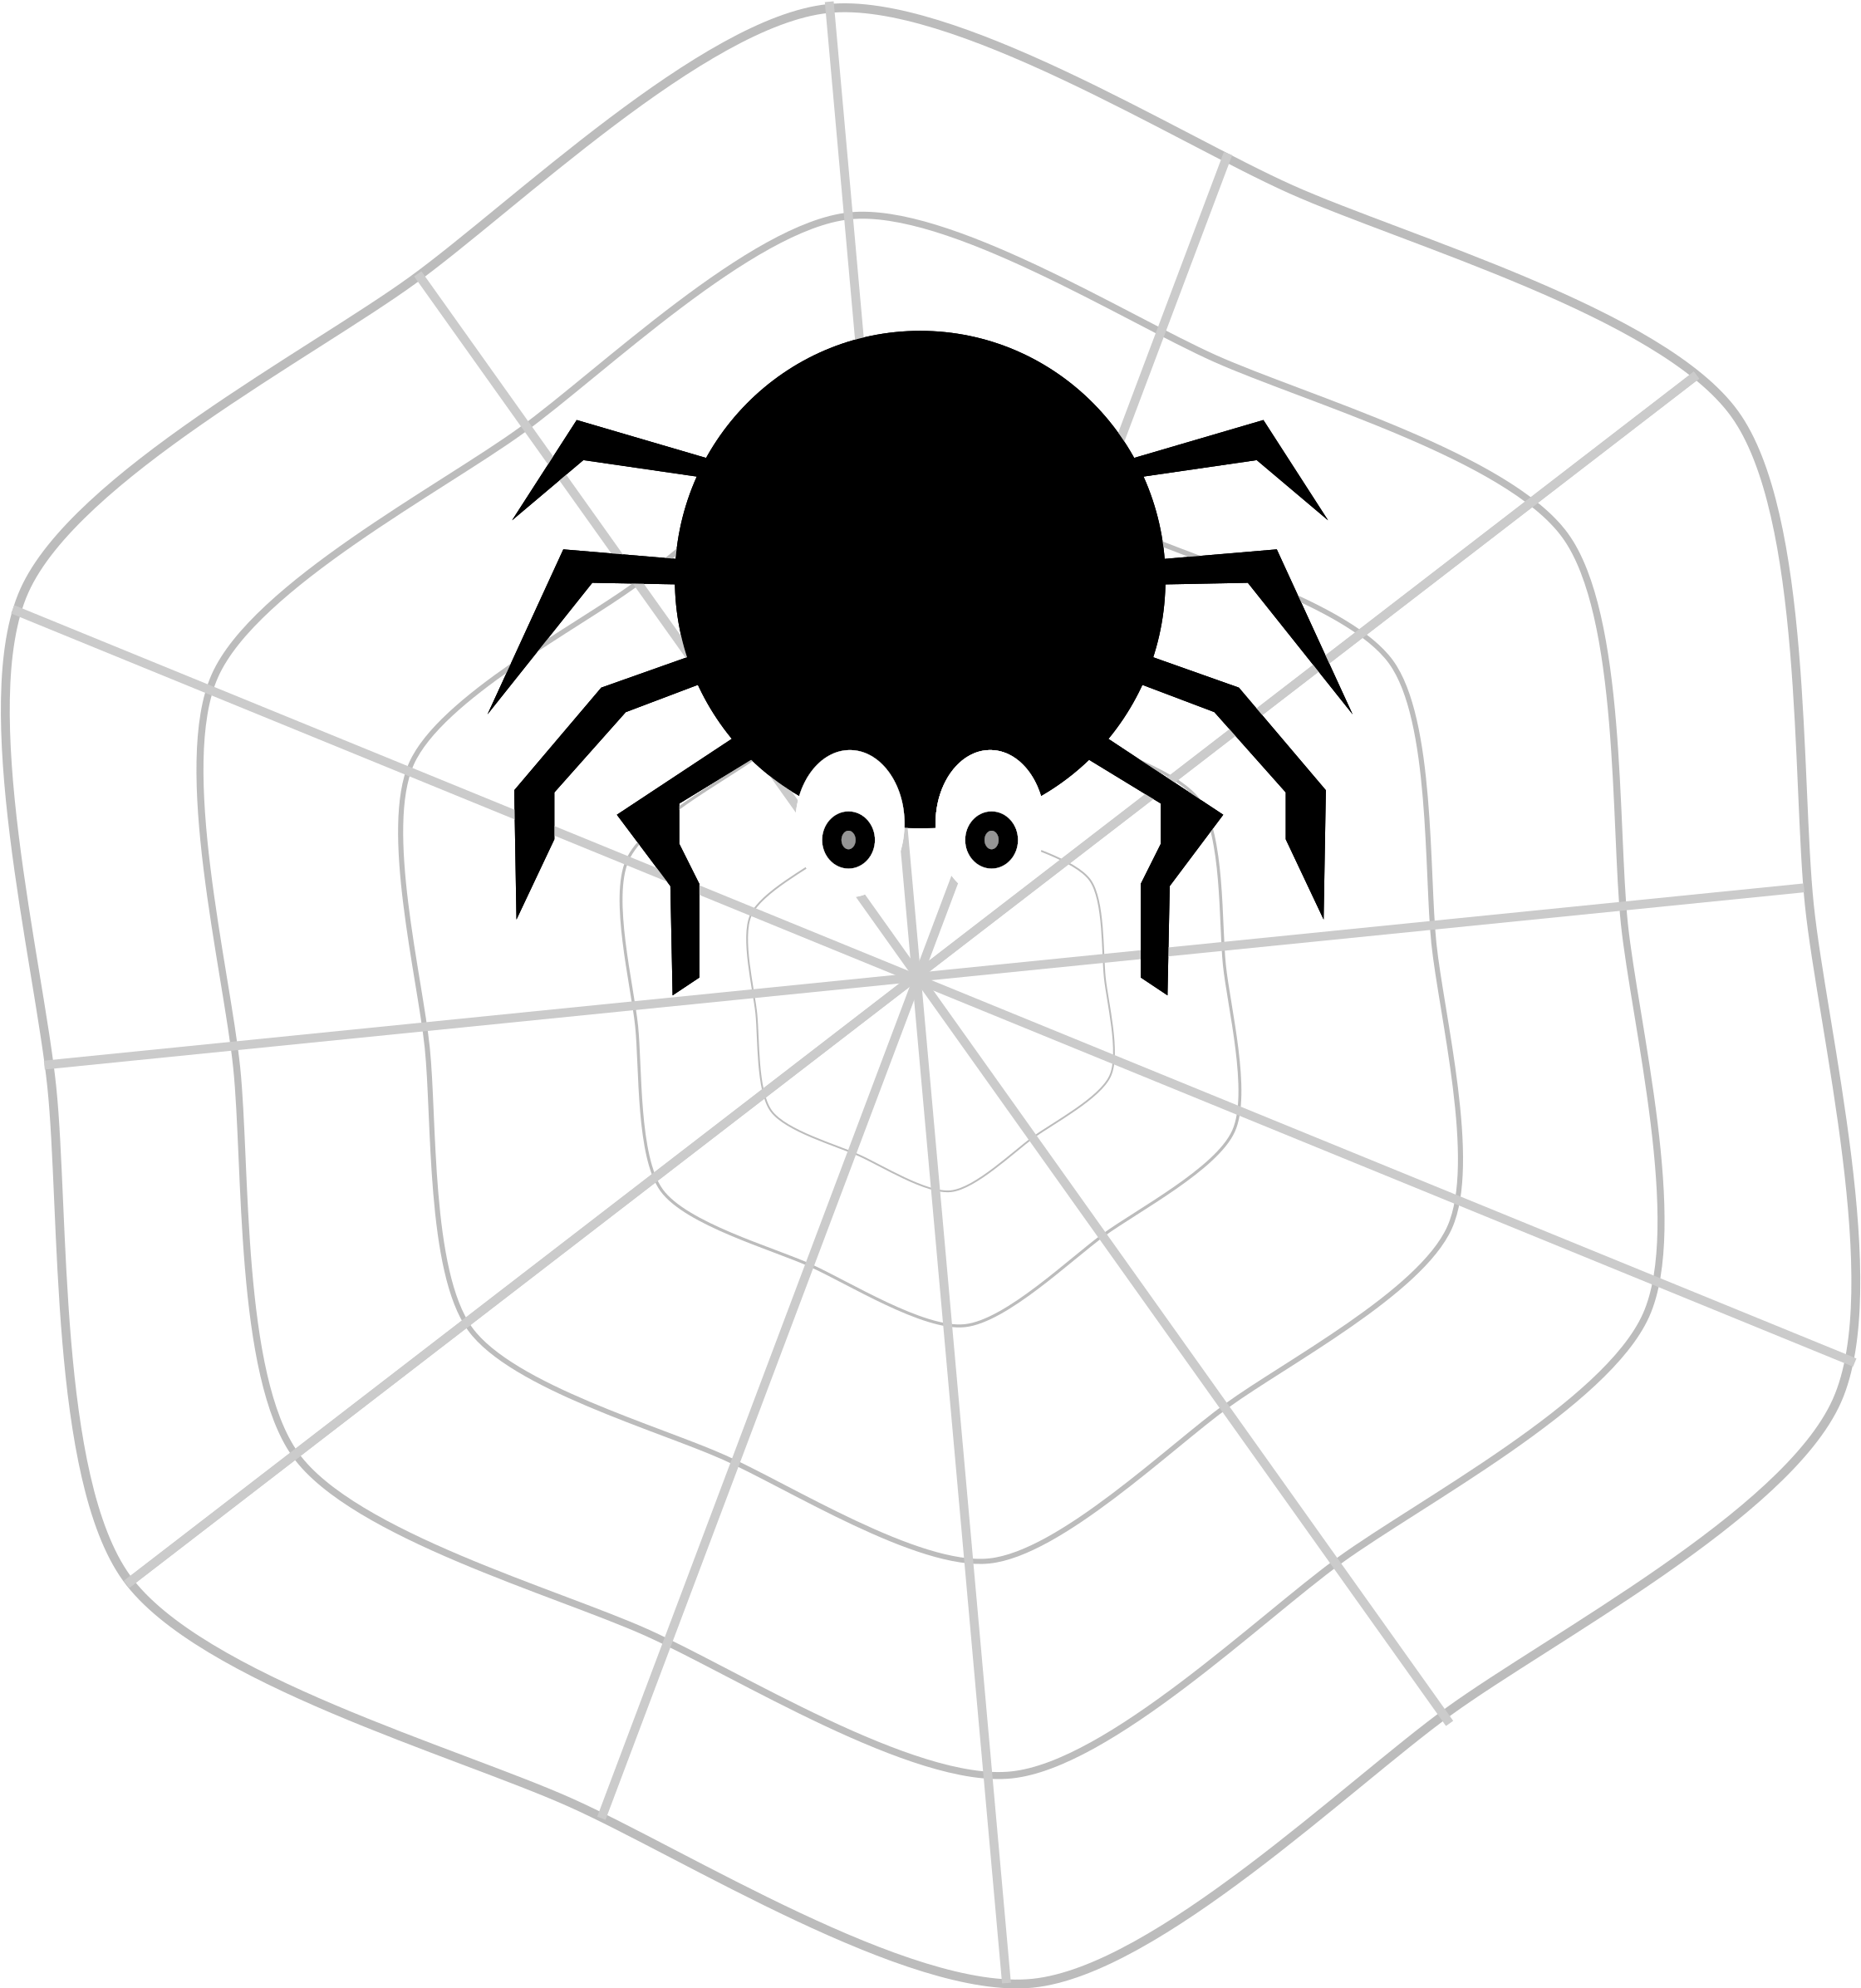 Spider On Web - Animated Spider In Web (2240x2400)